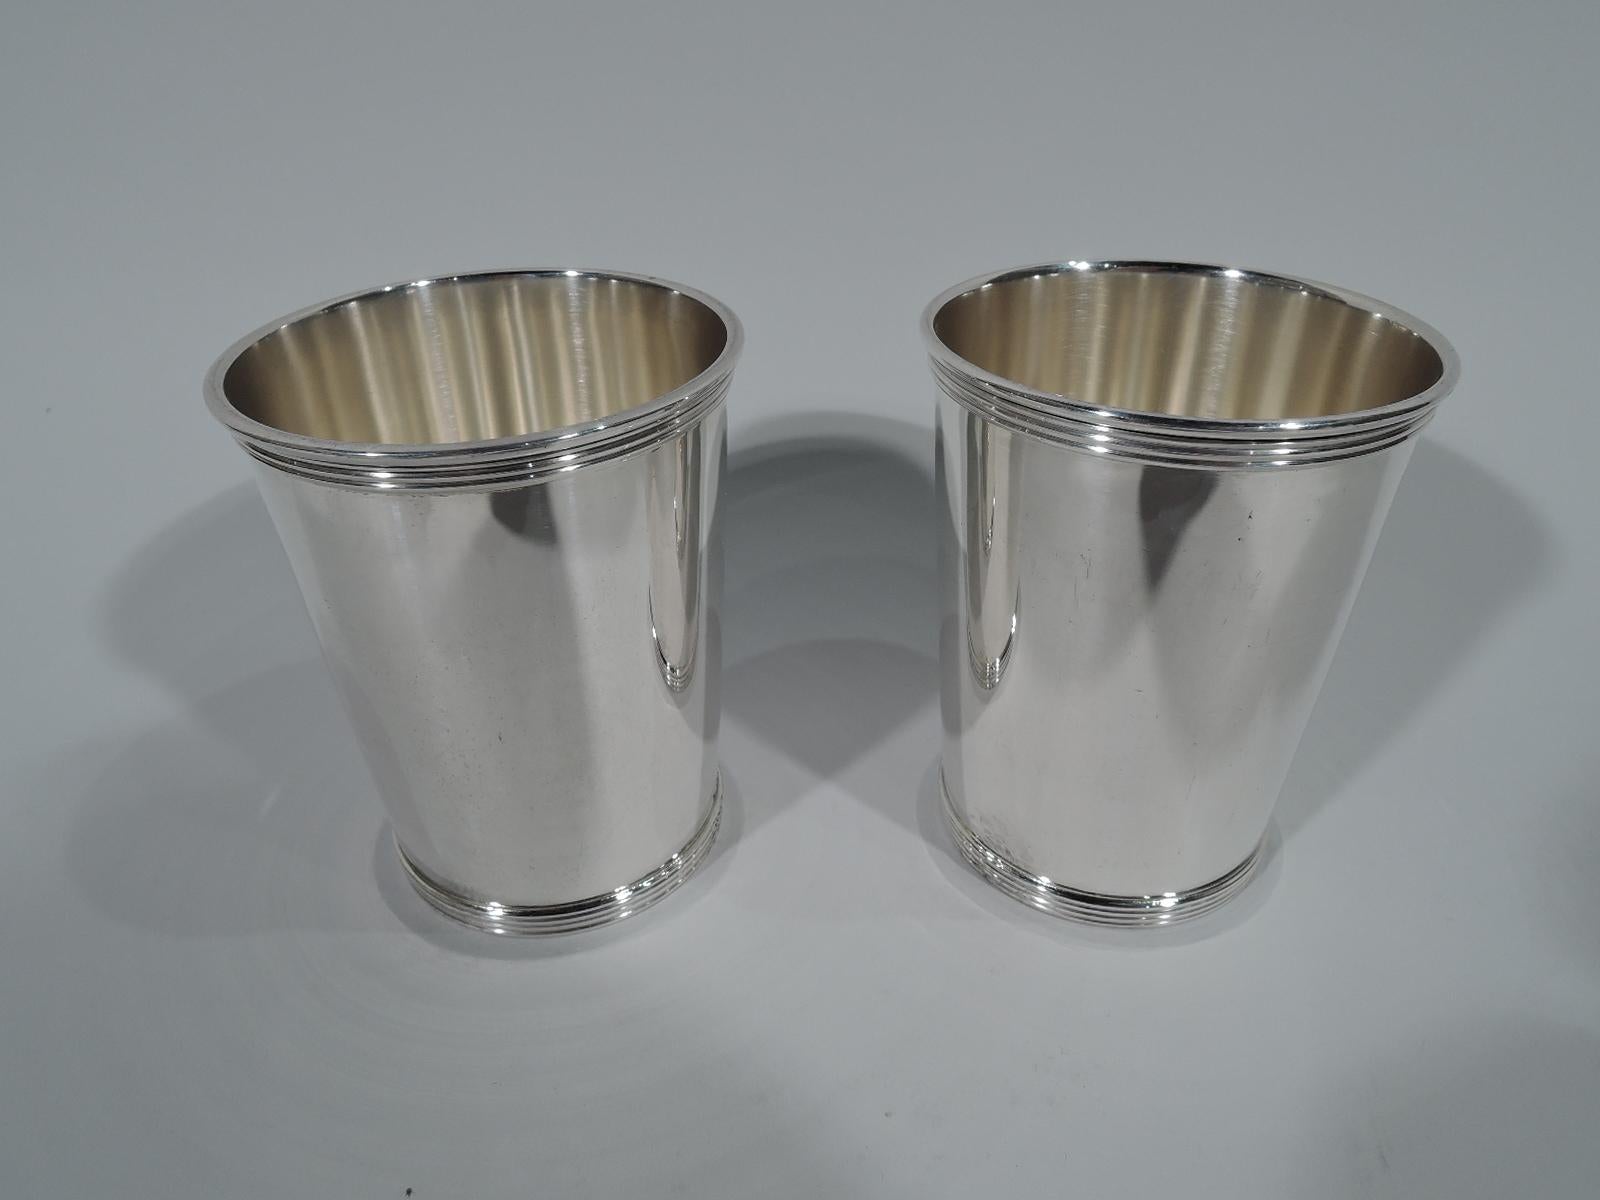 Set of 6 sterling silver mint julep cups. Made by Gorham in Providence. Straight and tapering sides and reeded rim and foot. Hallmarked Newport (a Gorham trademark) with no. 1673. Total weight: 23 troy ounces.